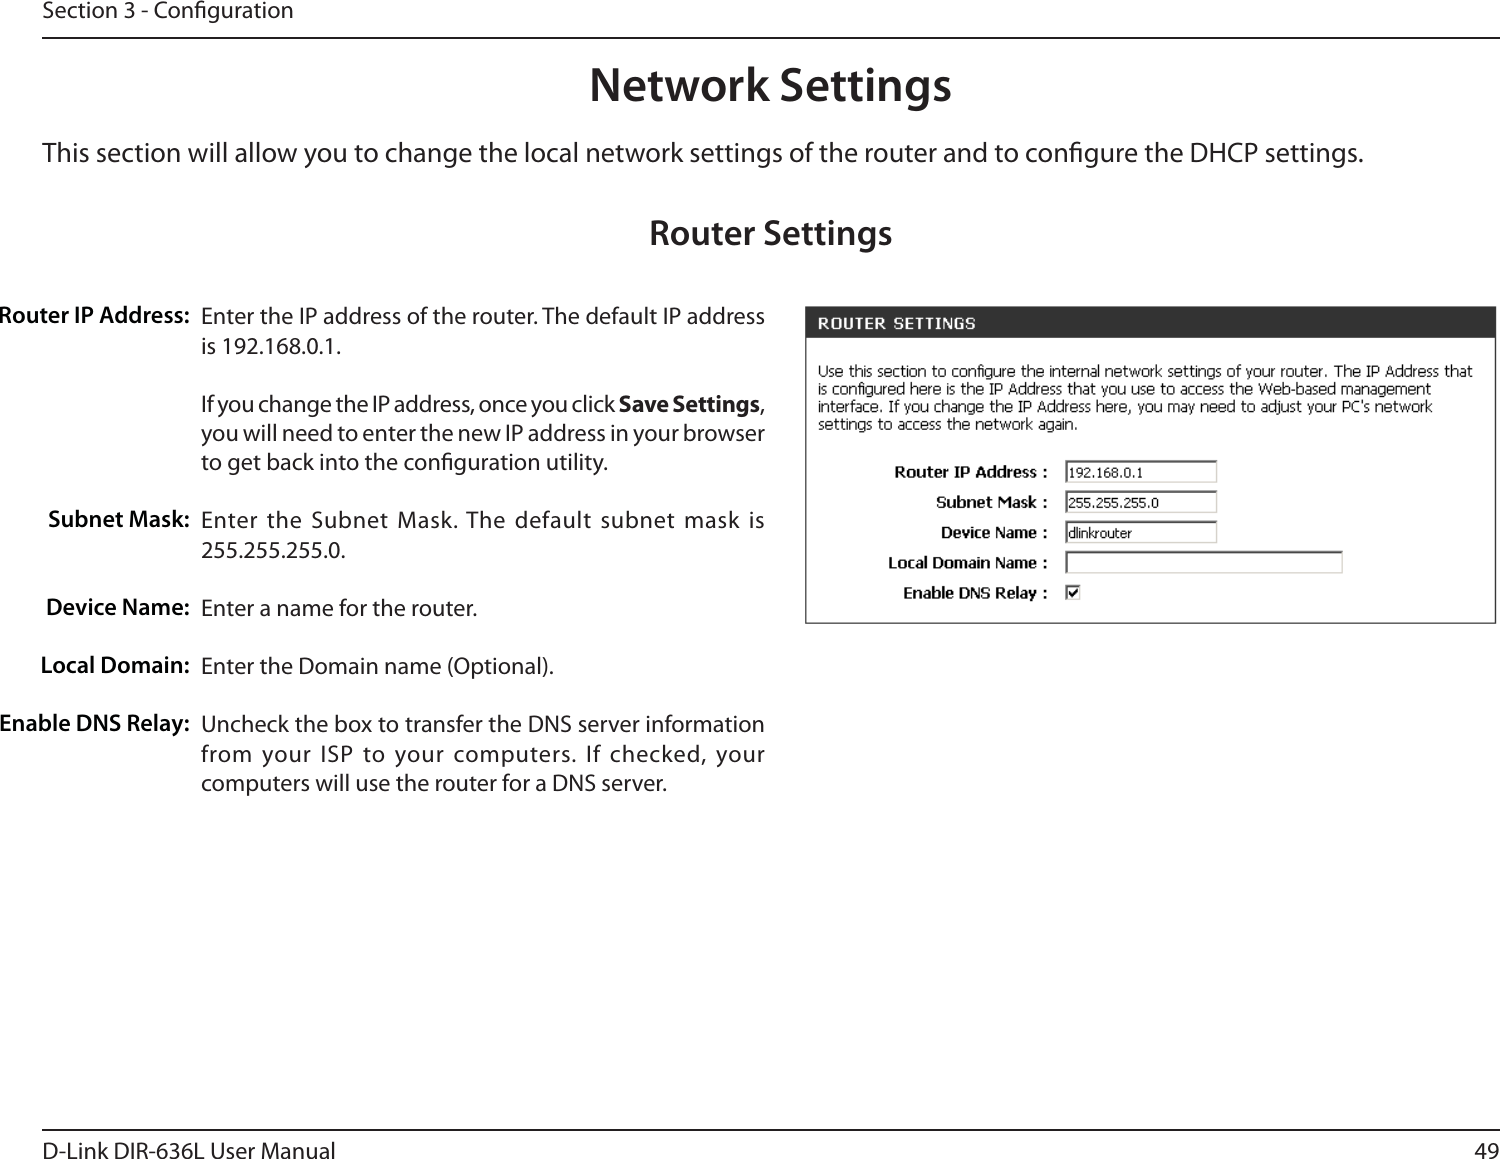 49D-Link DIR-636L User ManualSection 3 - CongurationThis section will allow you to change the local network settings of the router and to congure the DHCP settings.Network SettingsEnter the IP address of the router. The default IP address is 192.168.0.1.If you change the IP address, once you click Save Settings, you will need to enter the new IP address in your browser to get back into the conguration utility.Enter the Subnet Mask. The default subnet mask is 255.255.255.0.Enter a name for the router.Enter the Domain name (Optional).Uncheck the box to transfer the DNS server information from your ISP to your computers. If checked, your computers will use the router for a DNS server.Router IP Address:Subnet Mask:Device Name:Local Domain:Enable DNS Relay:Router Settings